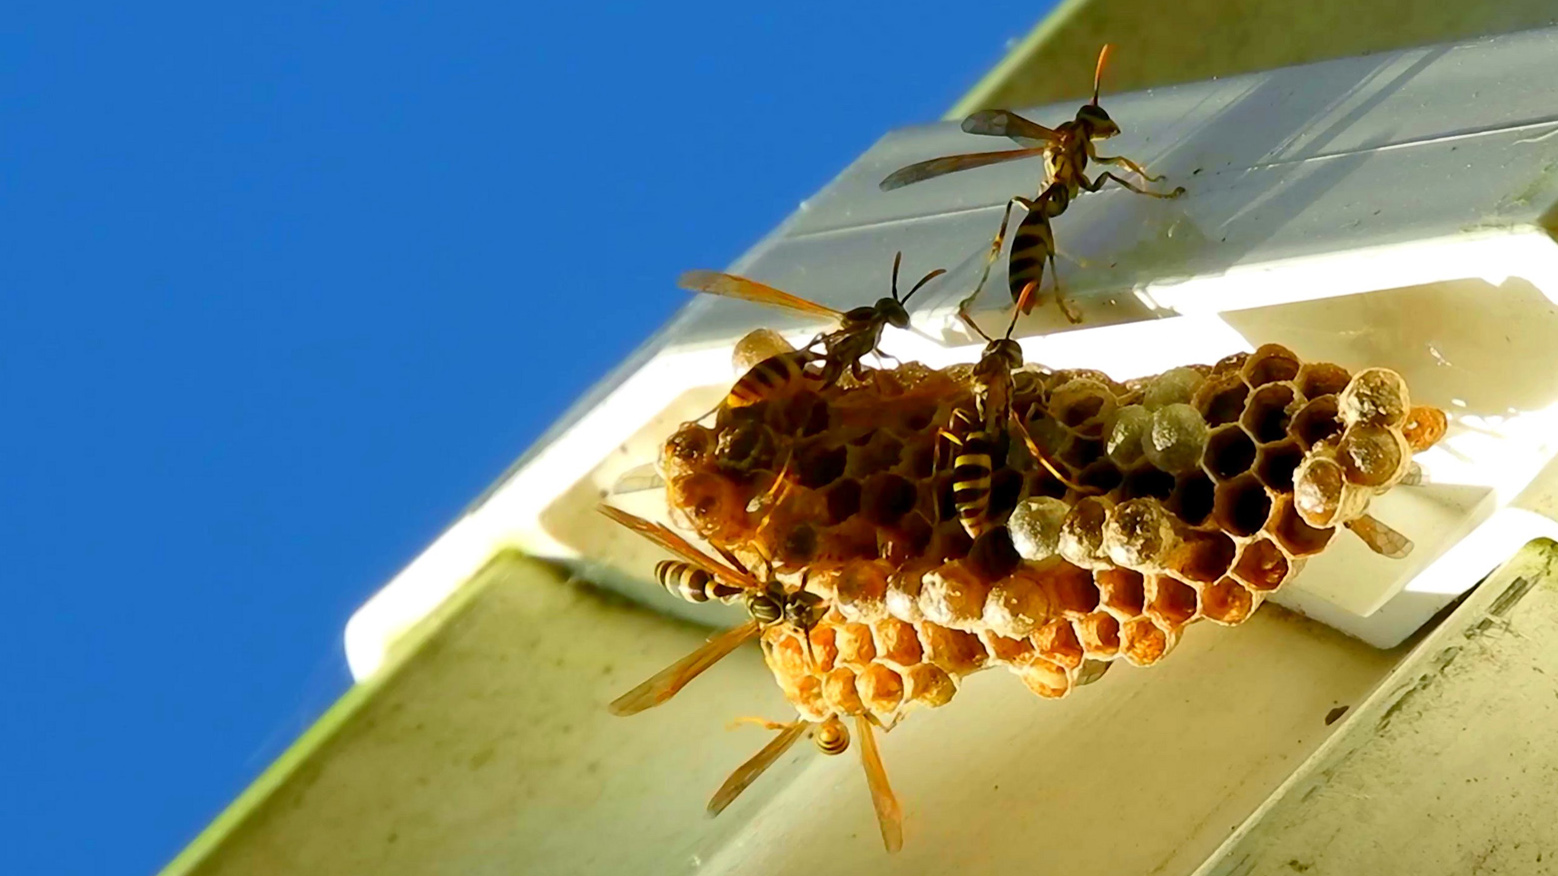 A wasp nest with multiple wasps flying around on the roof of a white house